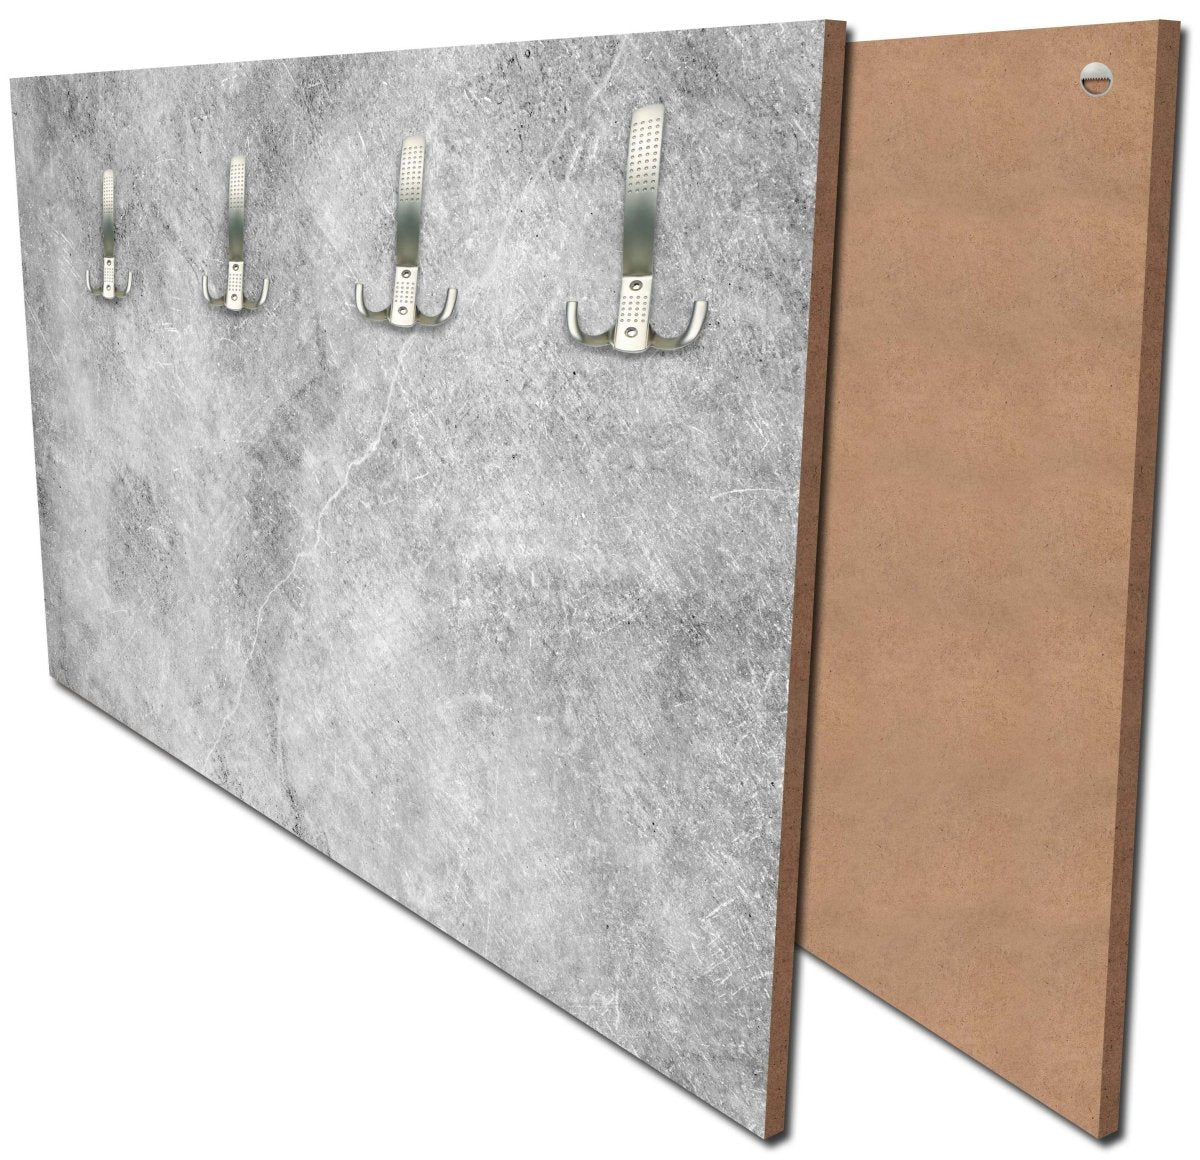 Cloakroom Concrete Wall - Grunge M0942